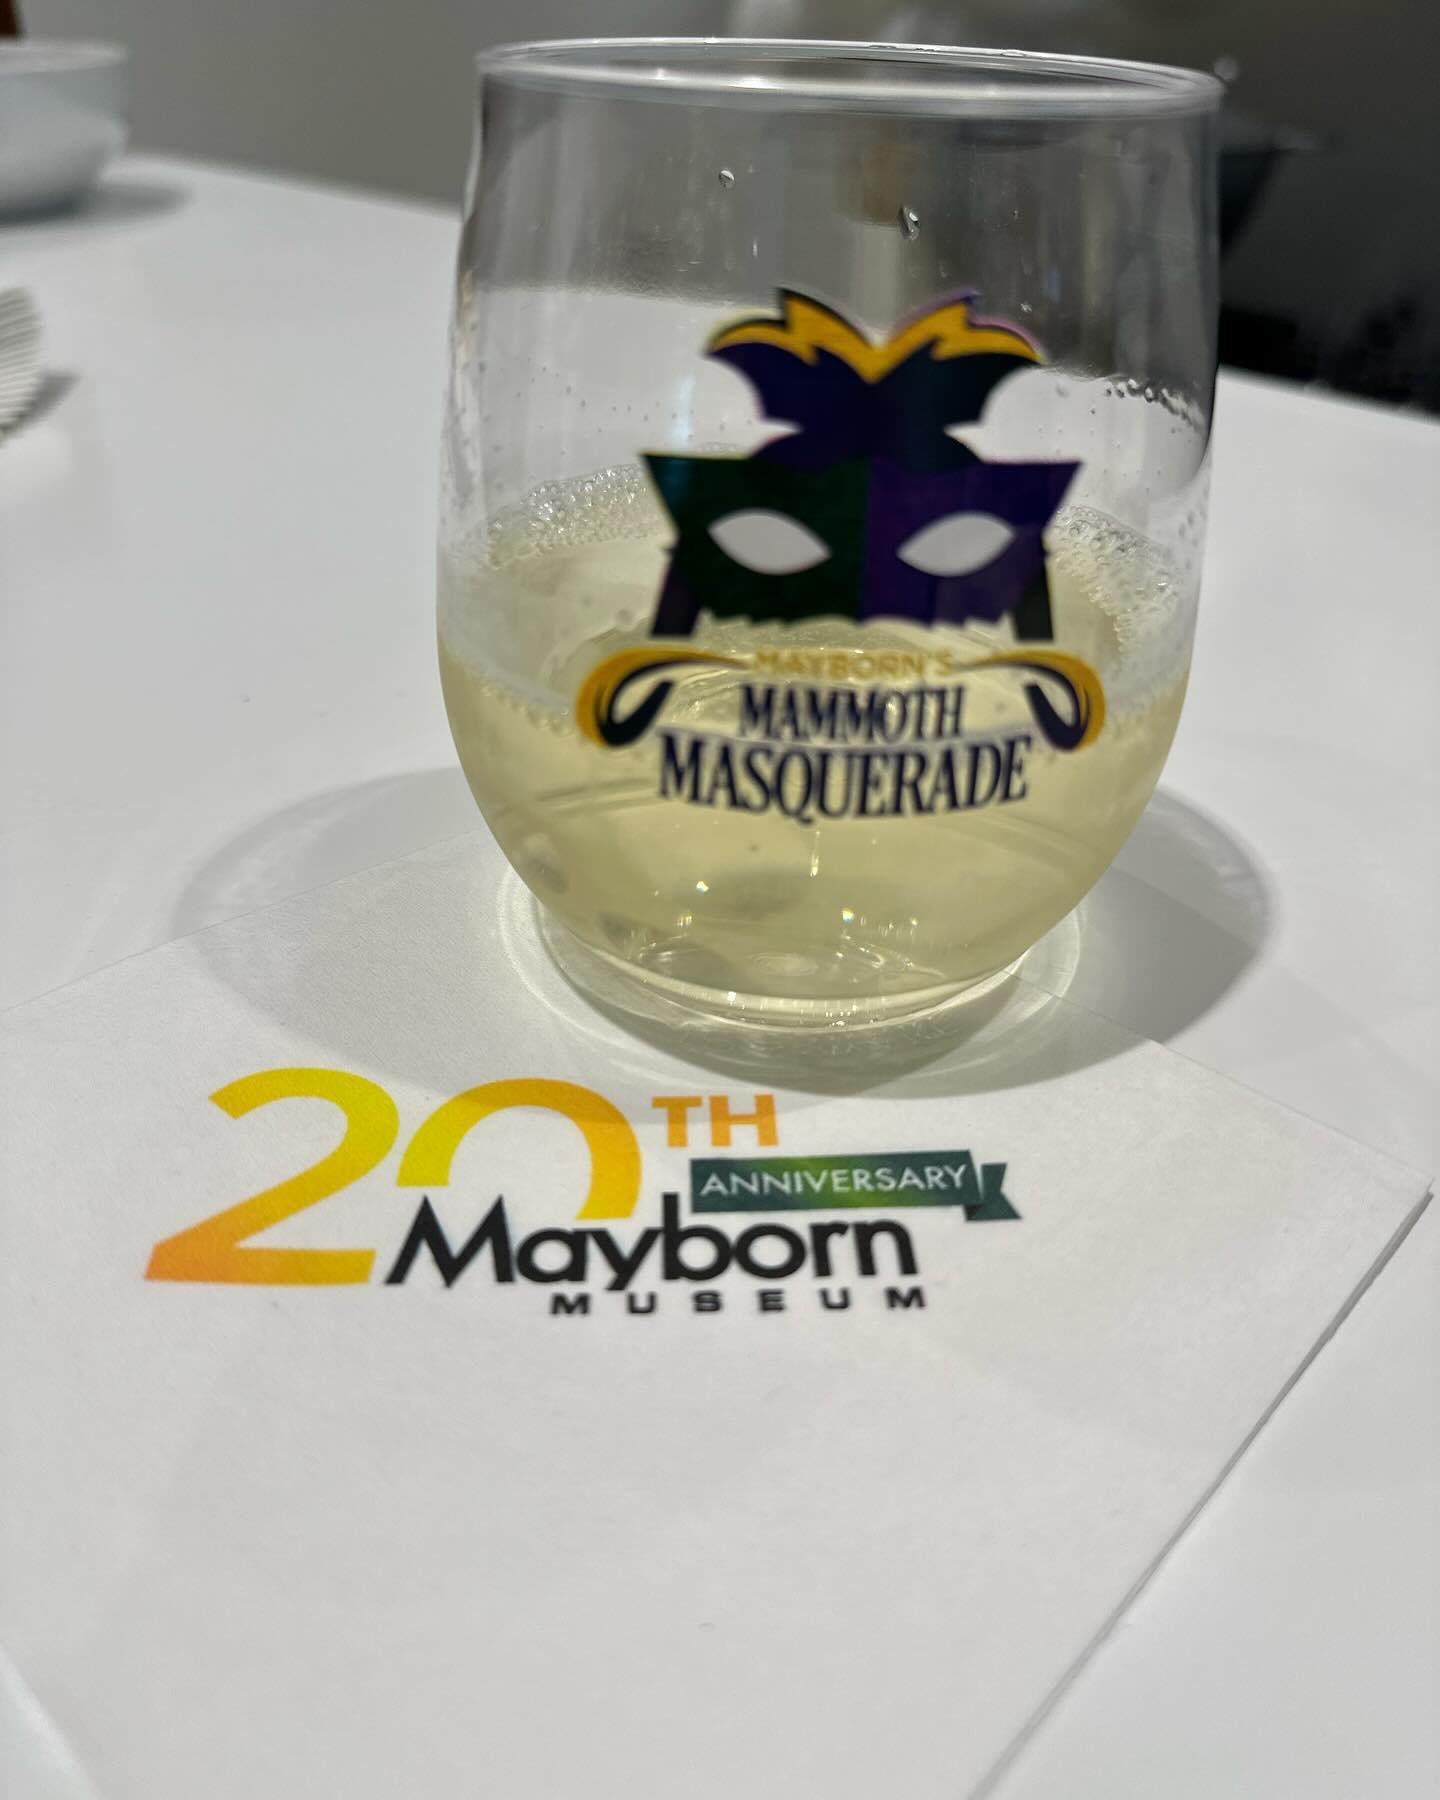 It feels amazing to see two logos we designed for @maybornmuseum in use tonight as they gear up for their Mammoth Masquerade Gala! It&rsquo;s rewarding to see our designs come to life for such an exciting event. Tickets are still available for their 